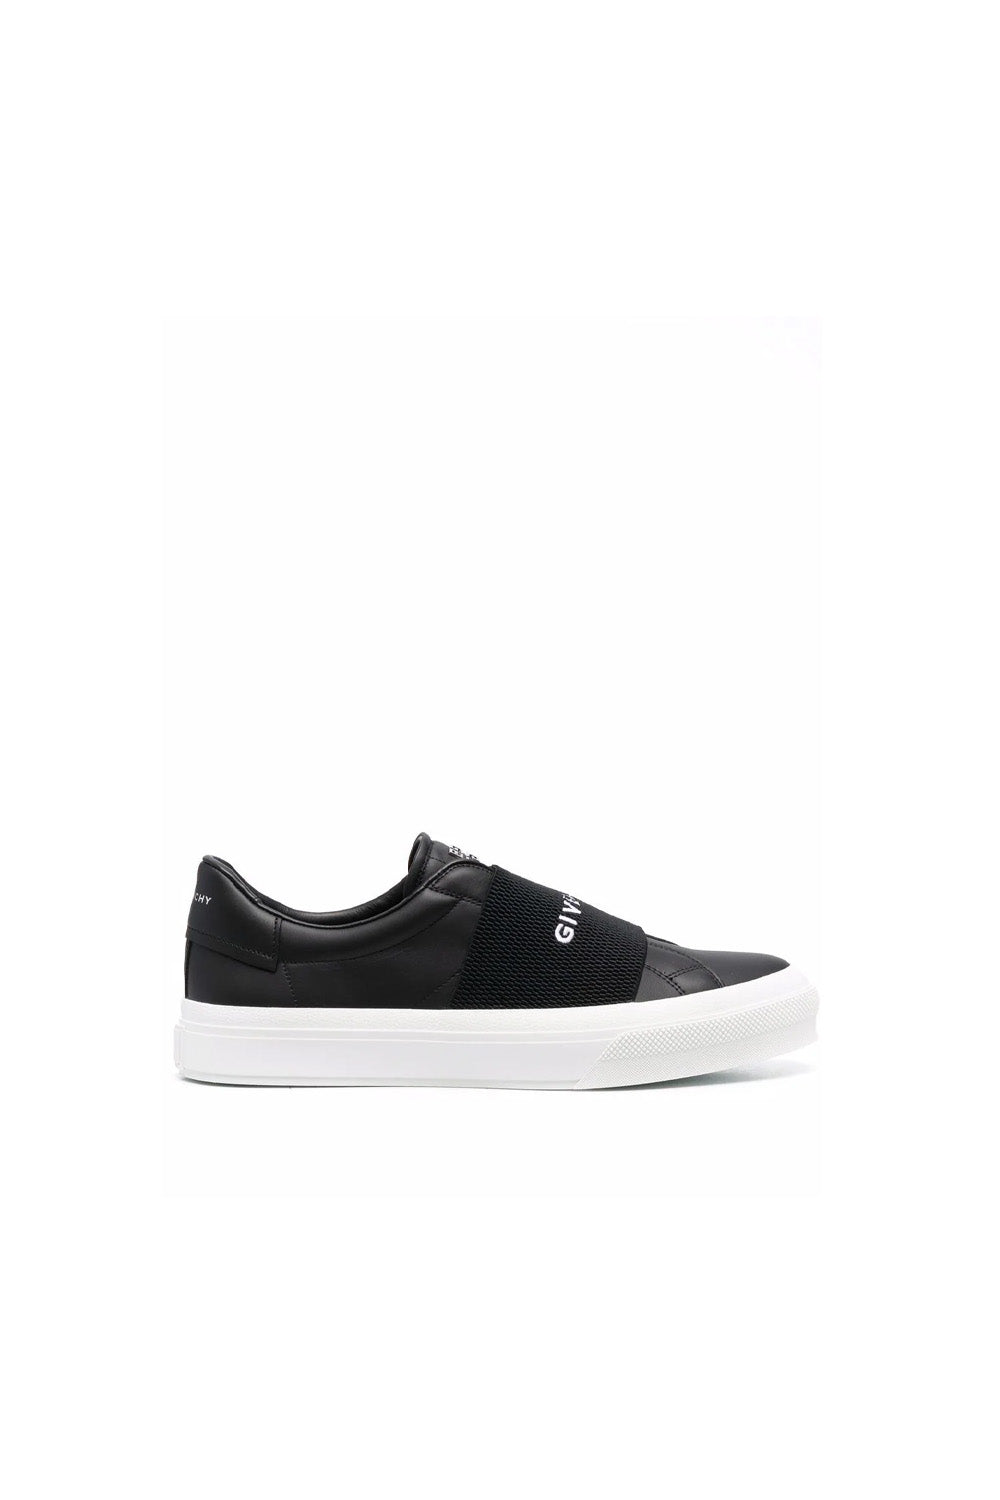 Givenchy Paris Strap leather sneakers